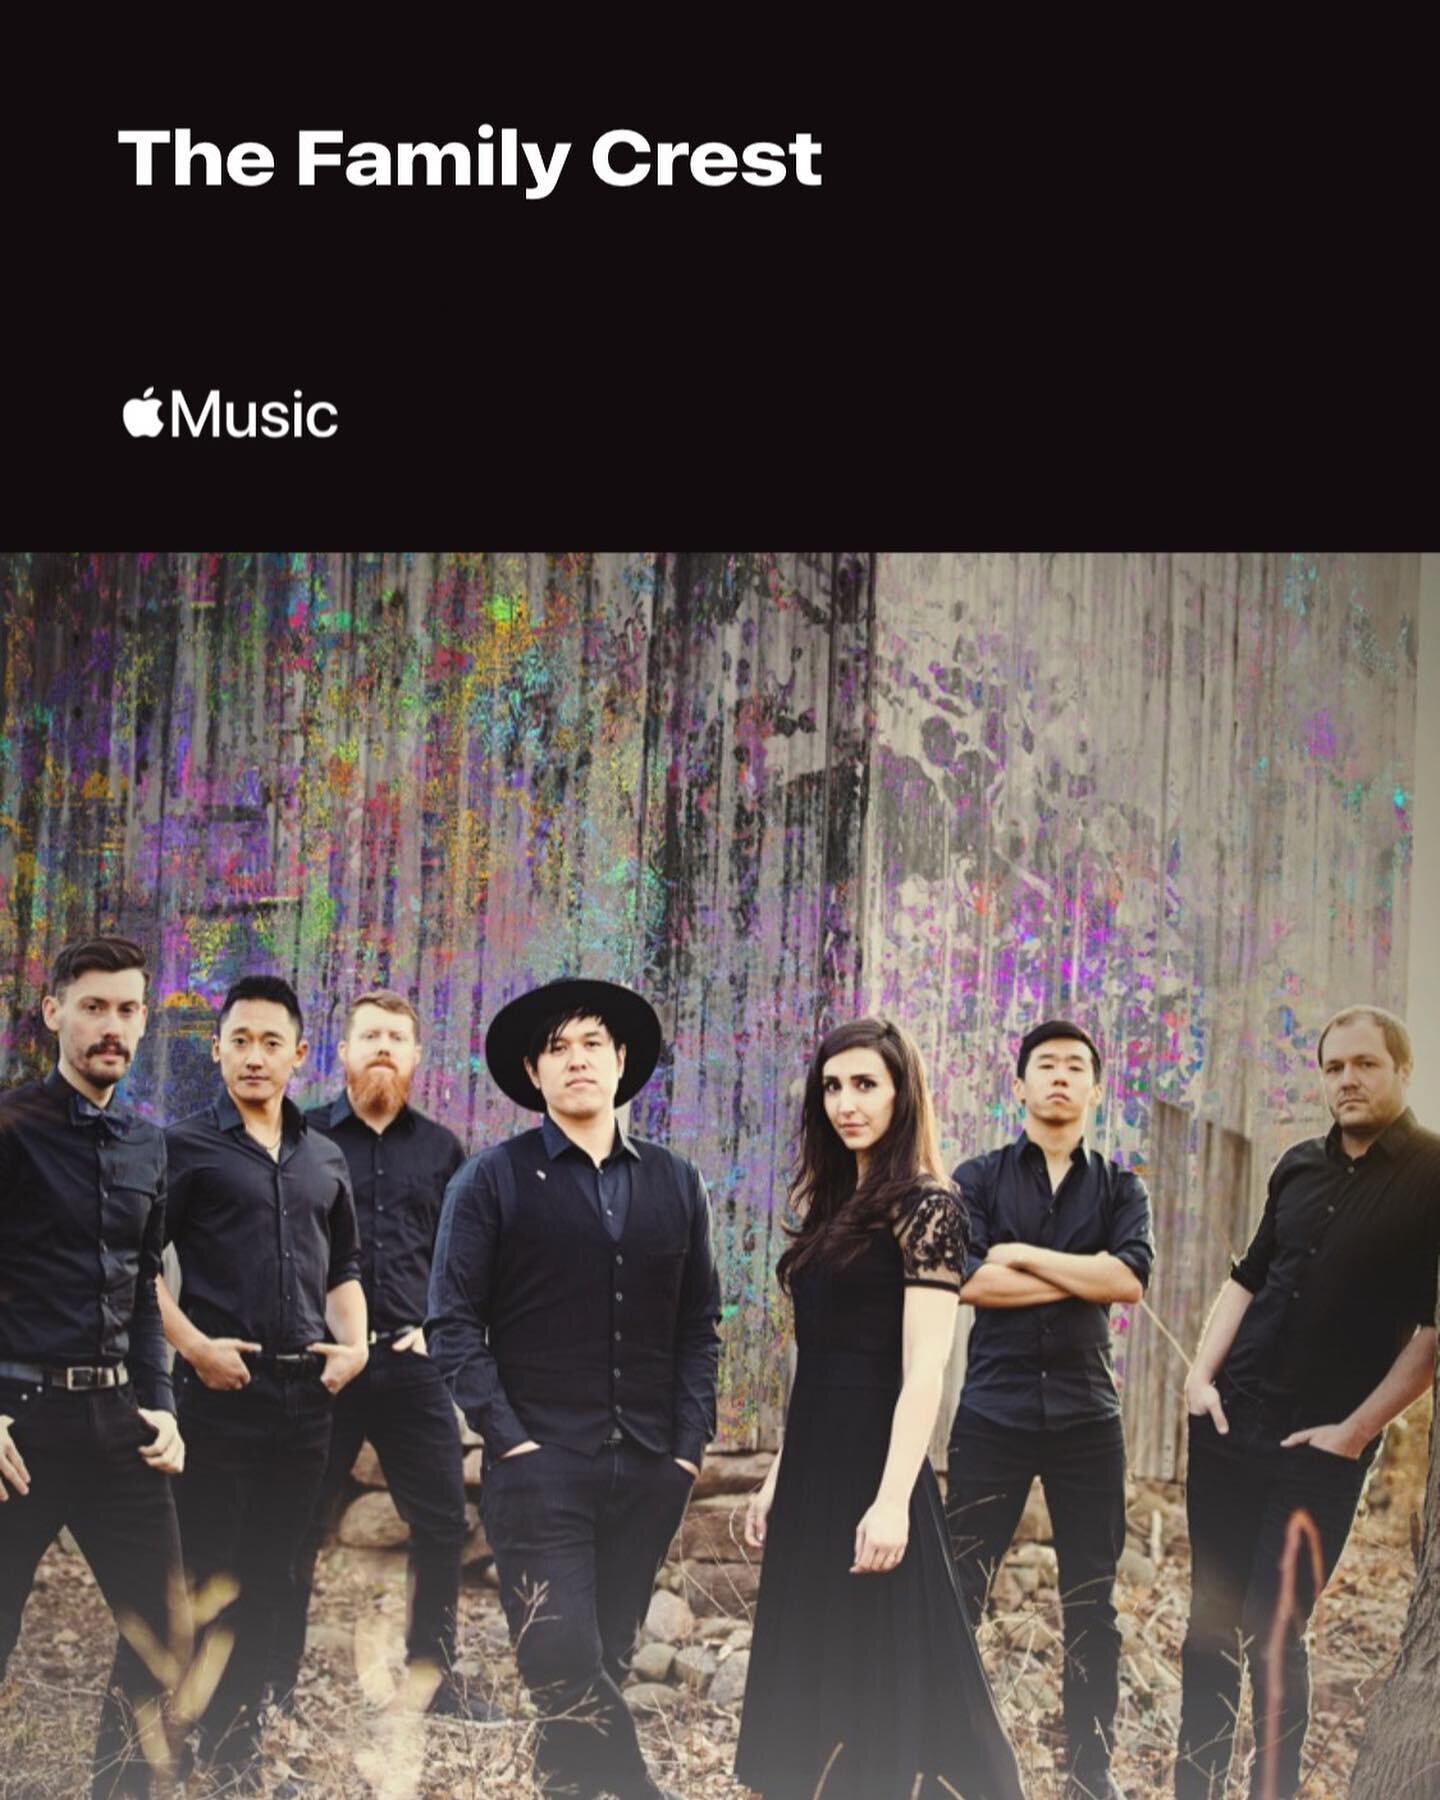 Fam, we made some playlists of our songs for those of you who use @applemusic! Click the links in our stories, and if you have playlists that incorporate our music, send them our way - we love checking them out. 🖤